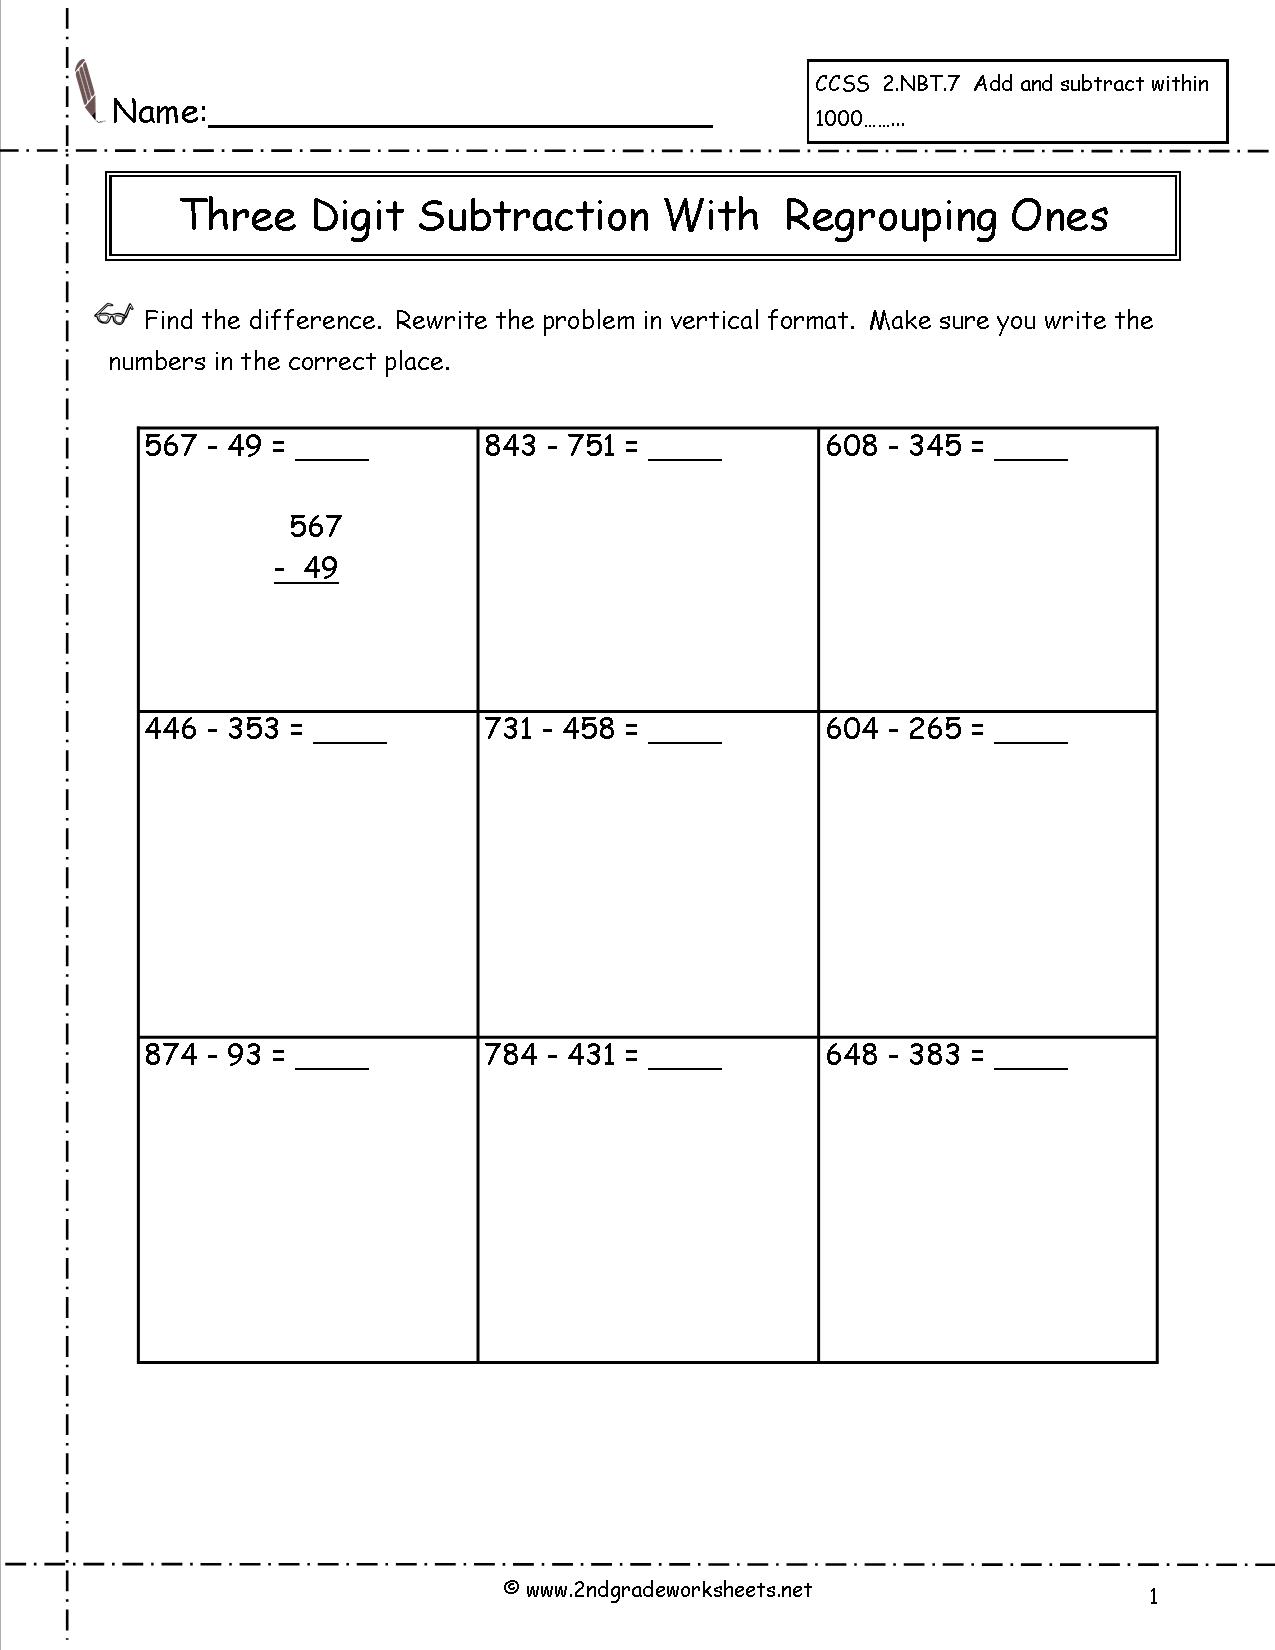 Three-Digit Subtraction with Regrouping Image